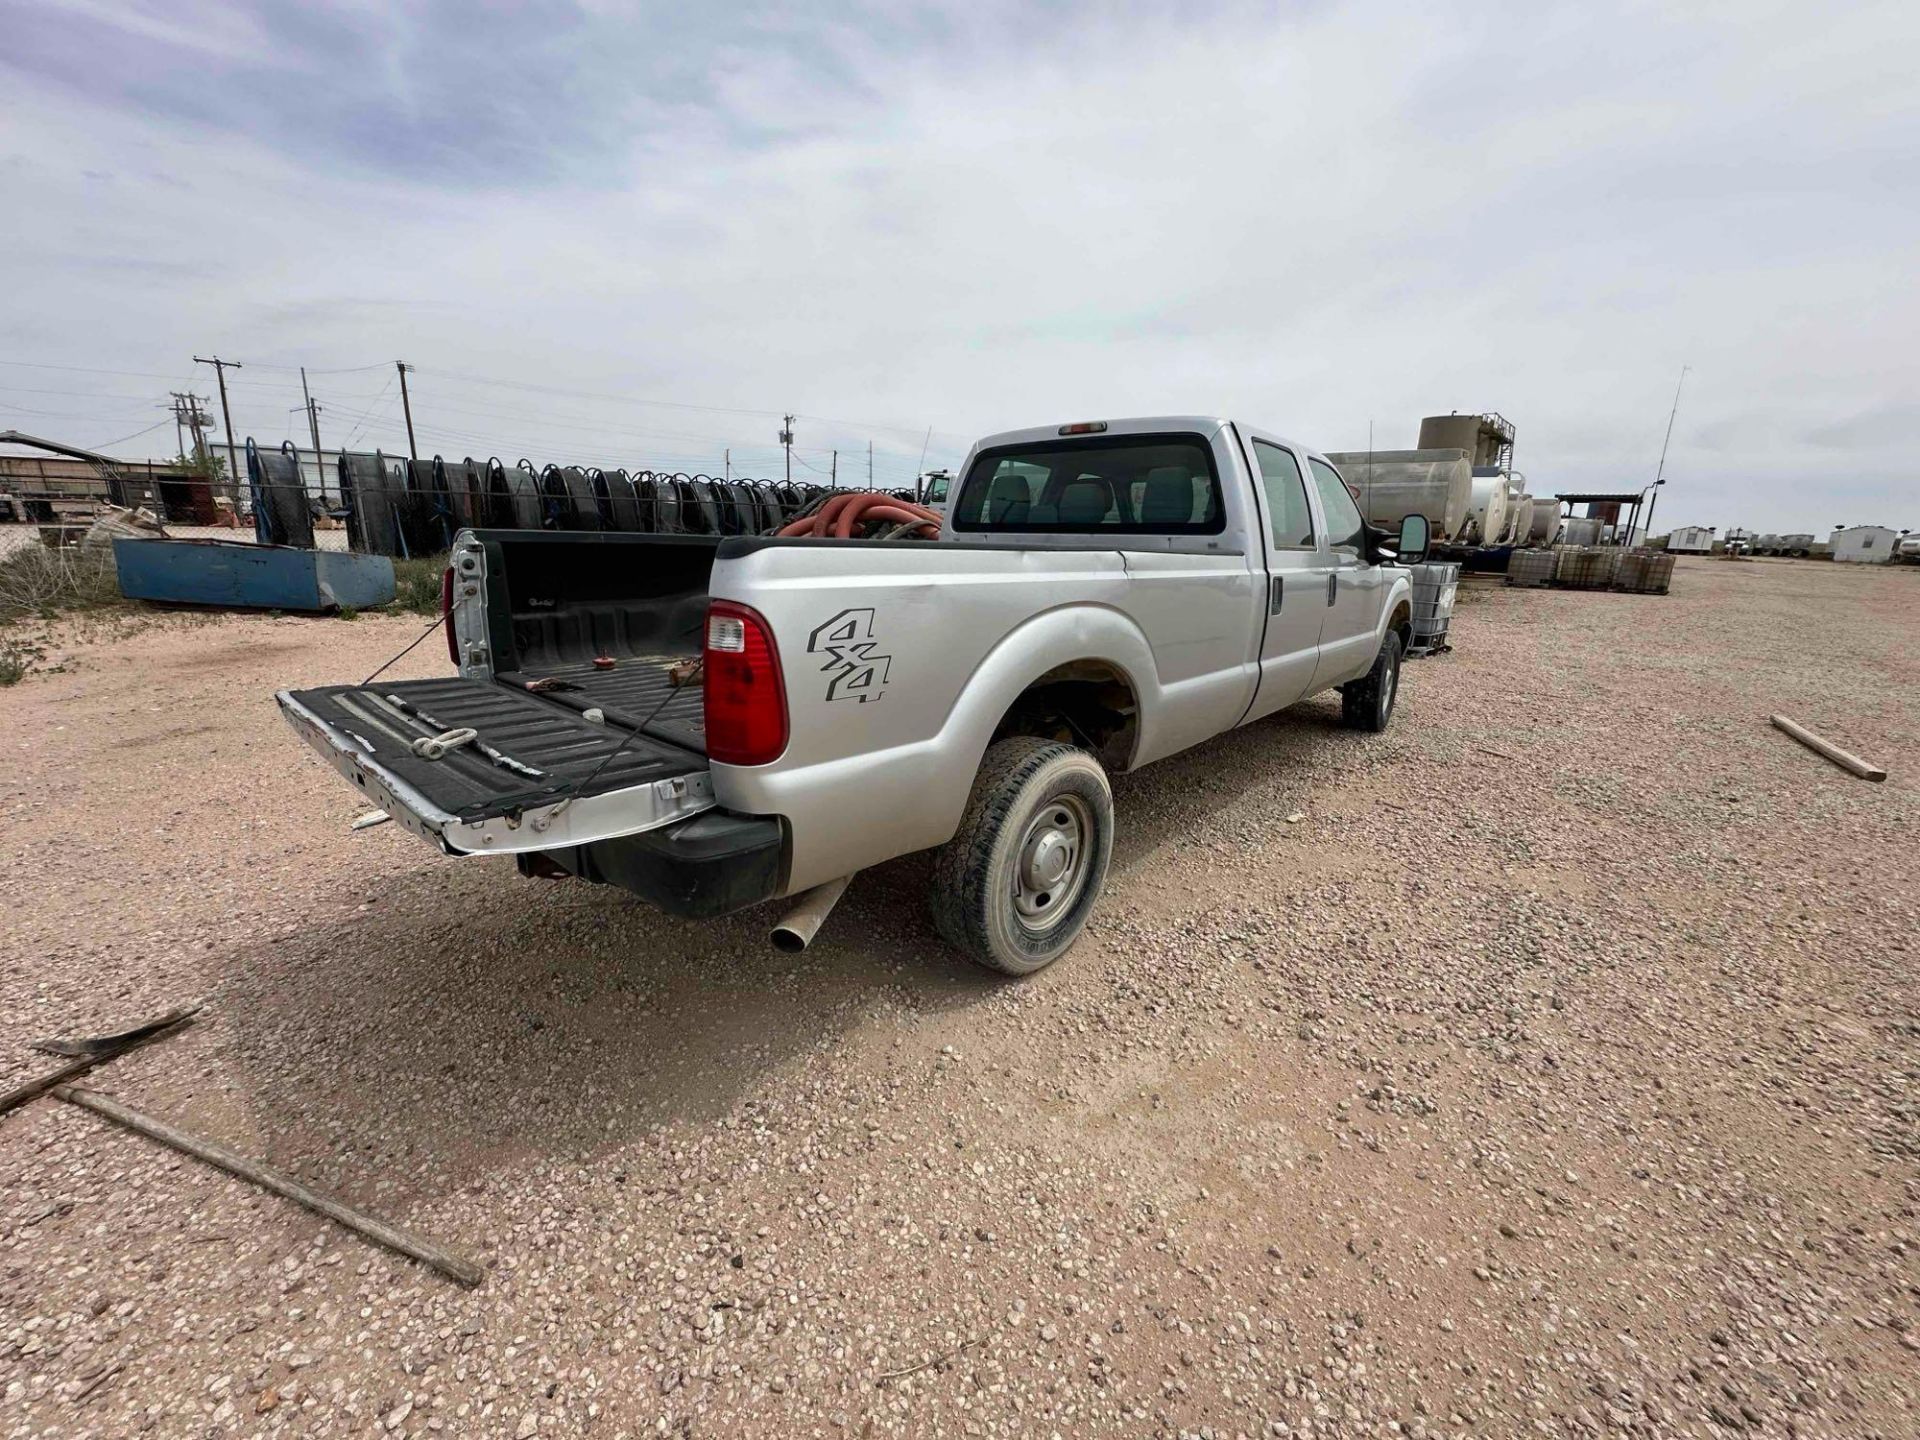 2011 Ford F350 SD Crew Cab Pickup Truck - Image 5 of 20